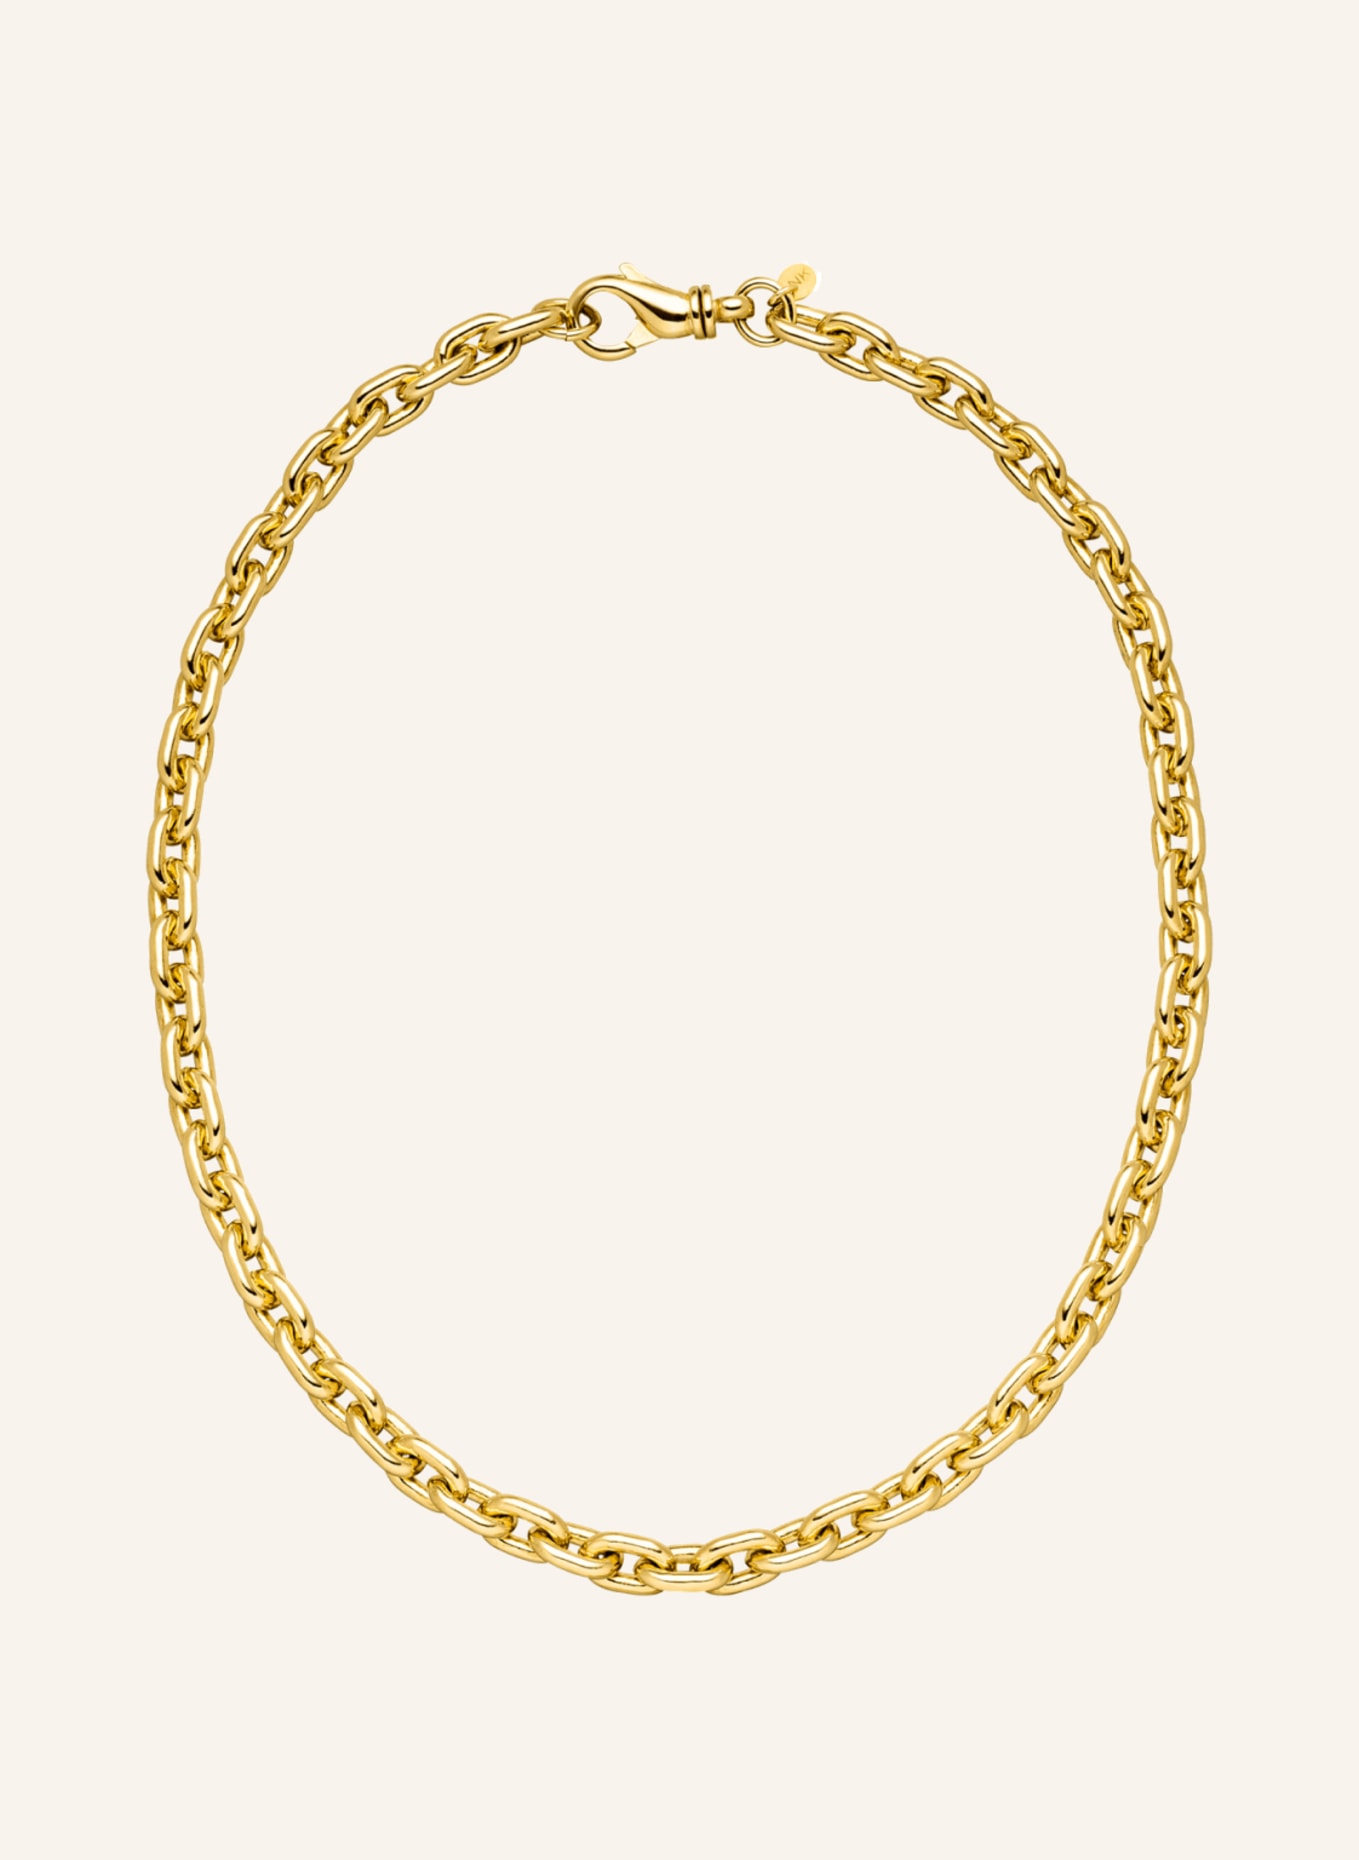 NINA KASTENS Kette CHUNKY NECKLACE by GLAMBOU, Farbe: GOLD (Bild 1)